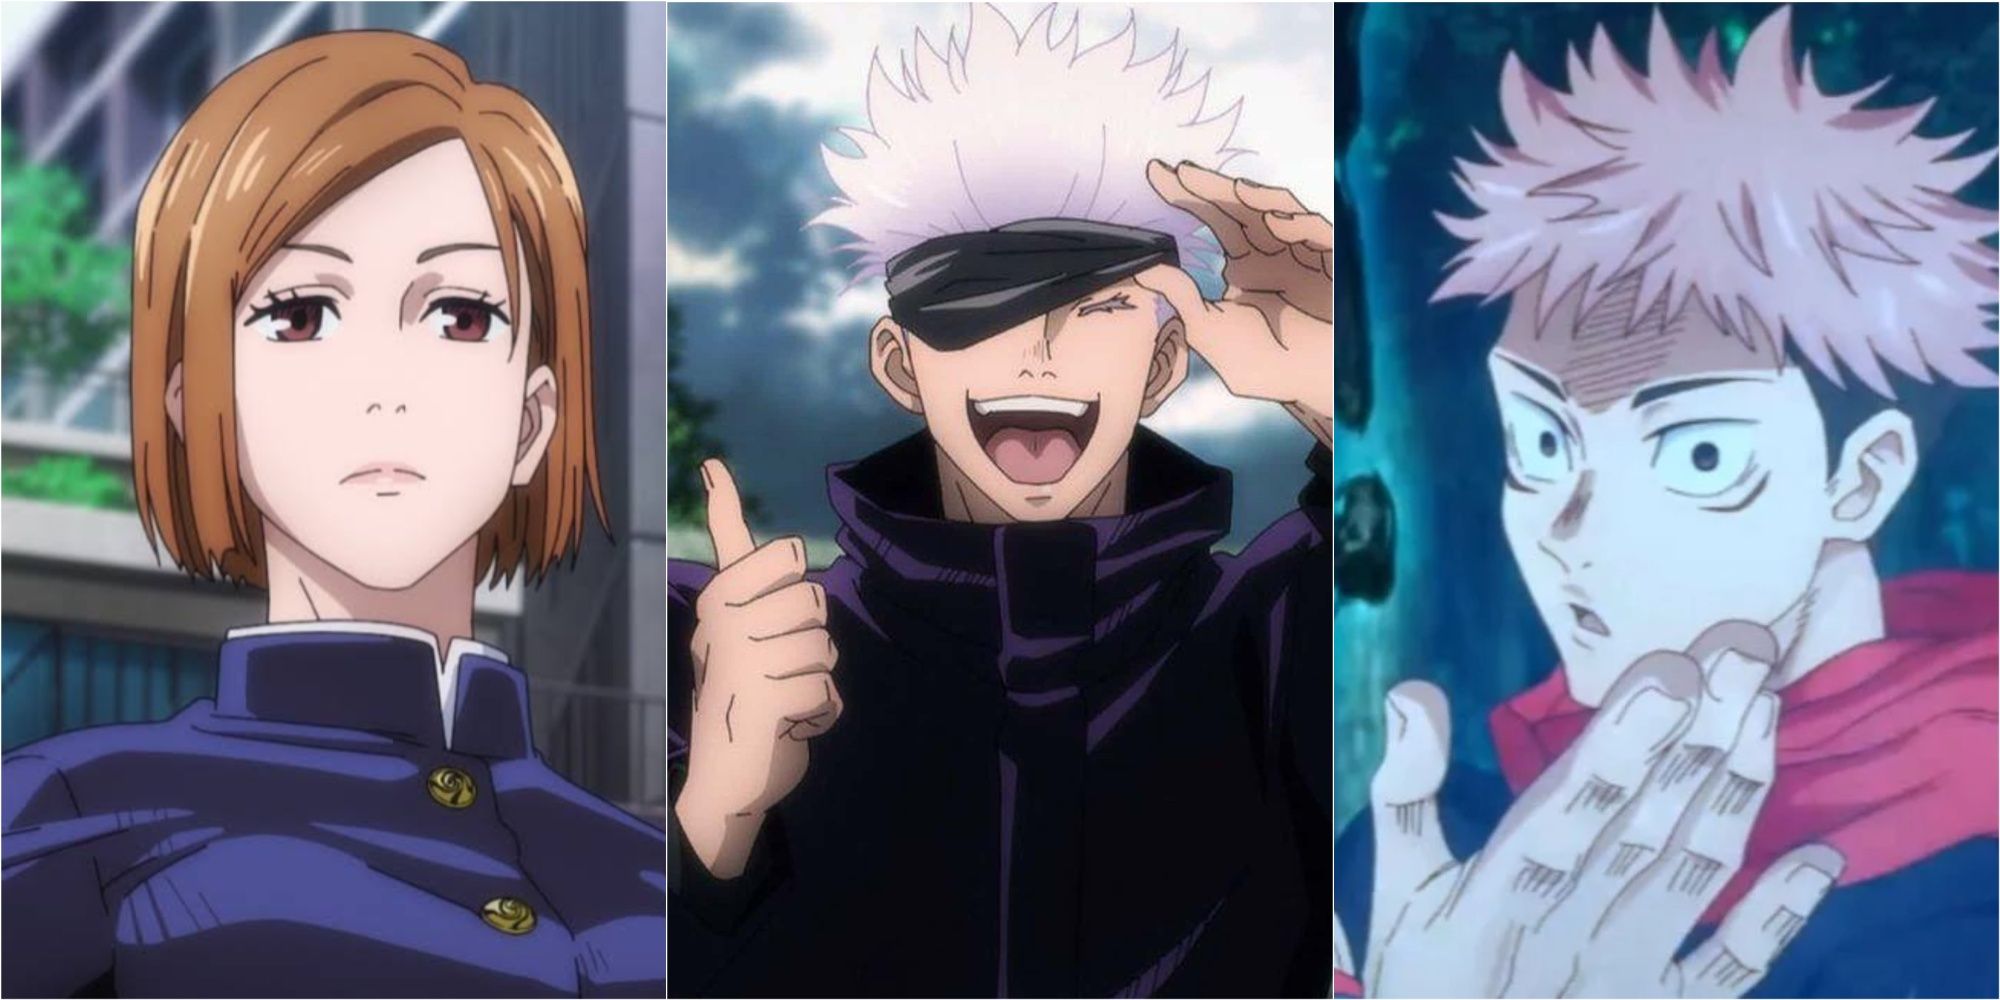 Things Jujutsu Kaisen Does Better Than Most Other Shonen Anime